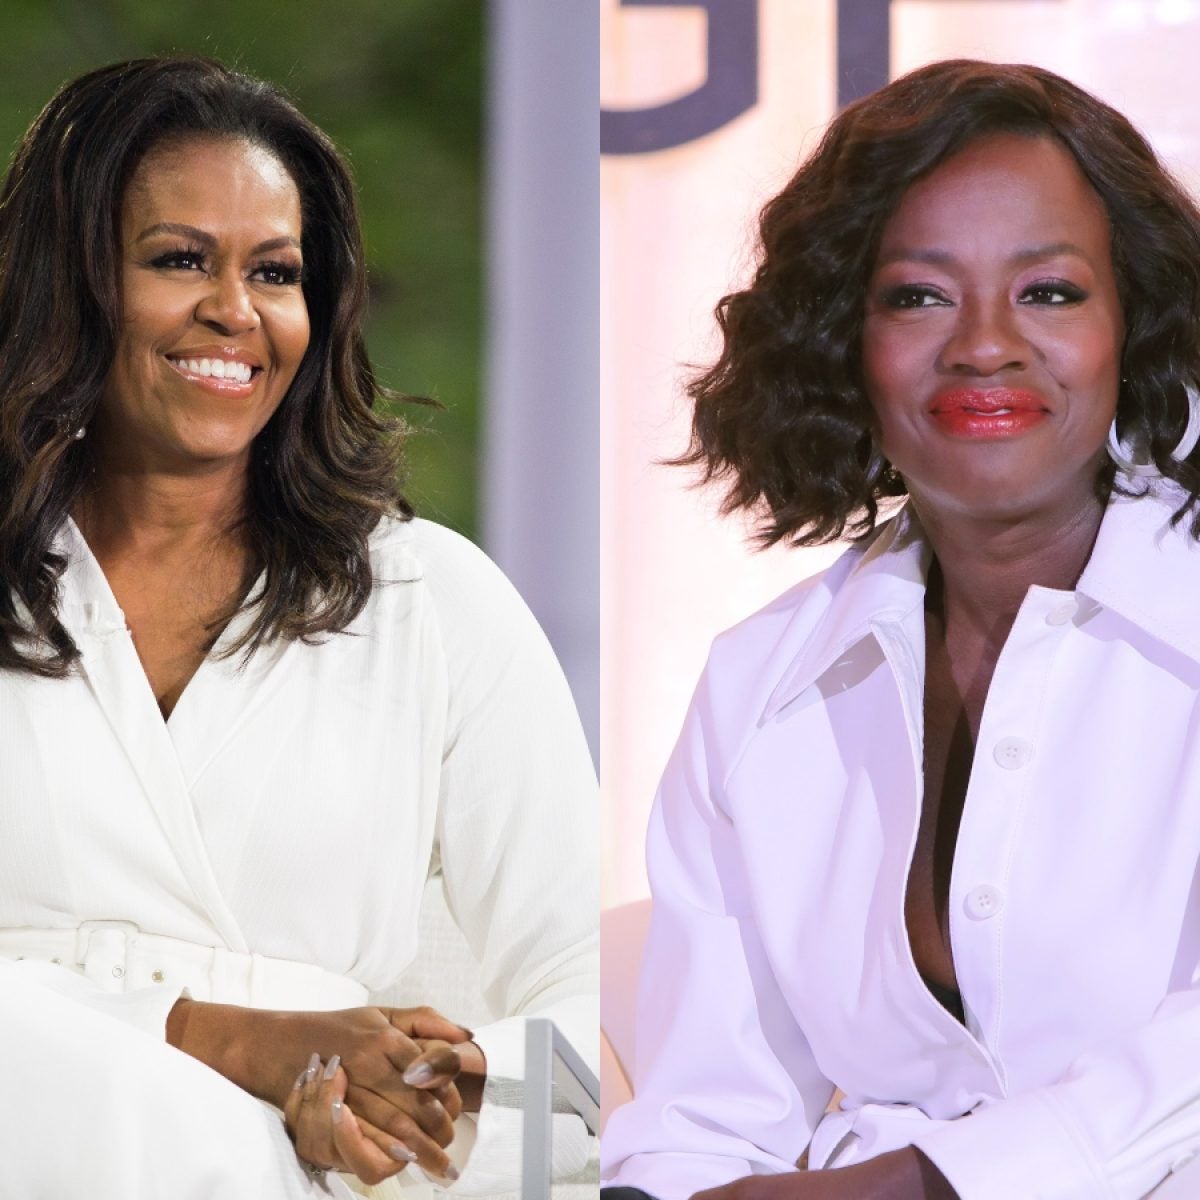 First Look: Viola Davis As Michelle Obama In 'The First Lady'